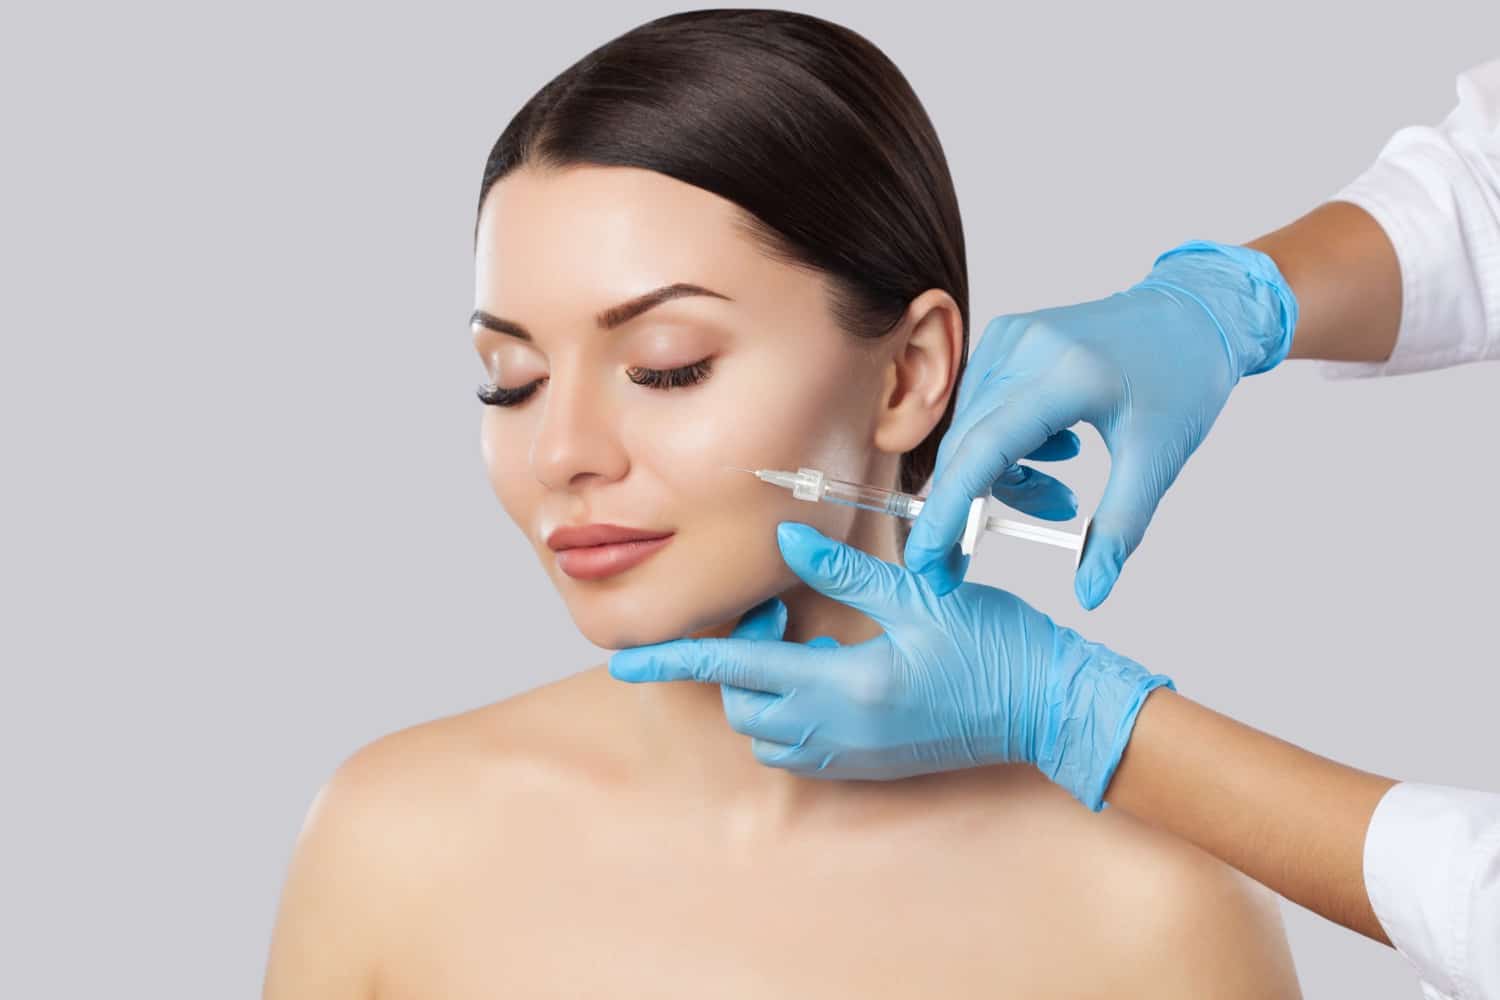 The doctor cosmetologist makes the Rejuvenating facial injections procedure for tightening and smoothing wrinkles on the face skin of a beautiful, young woman